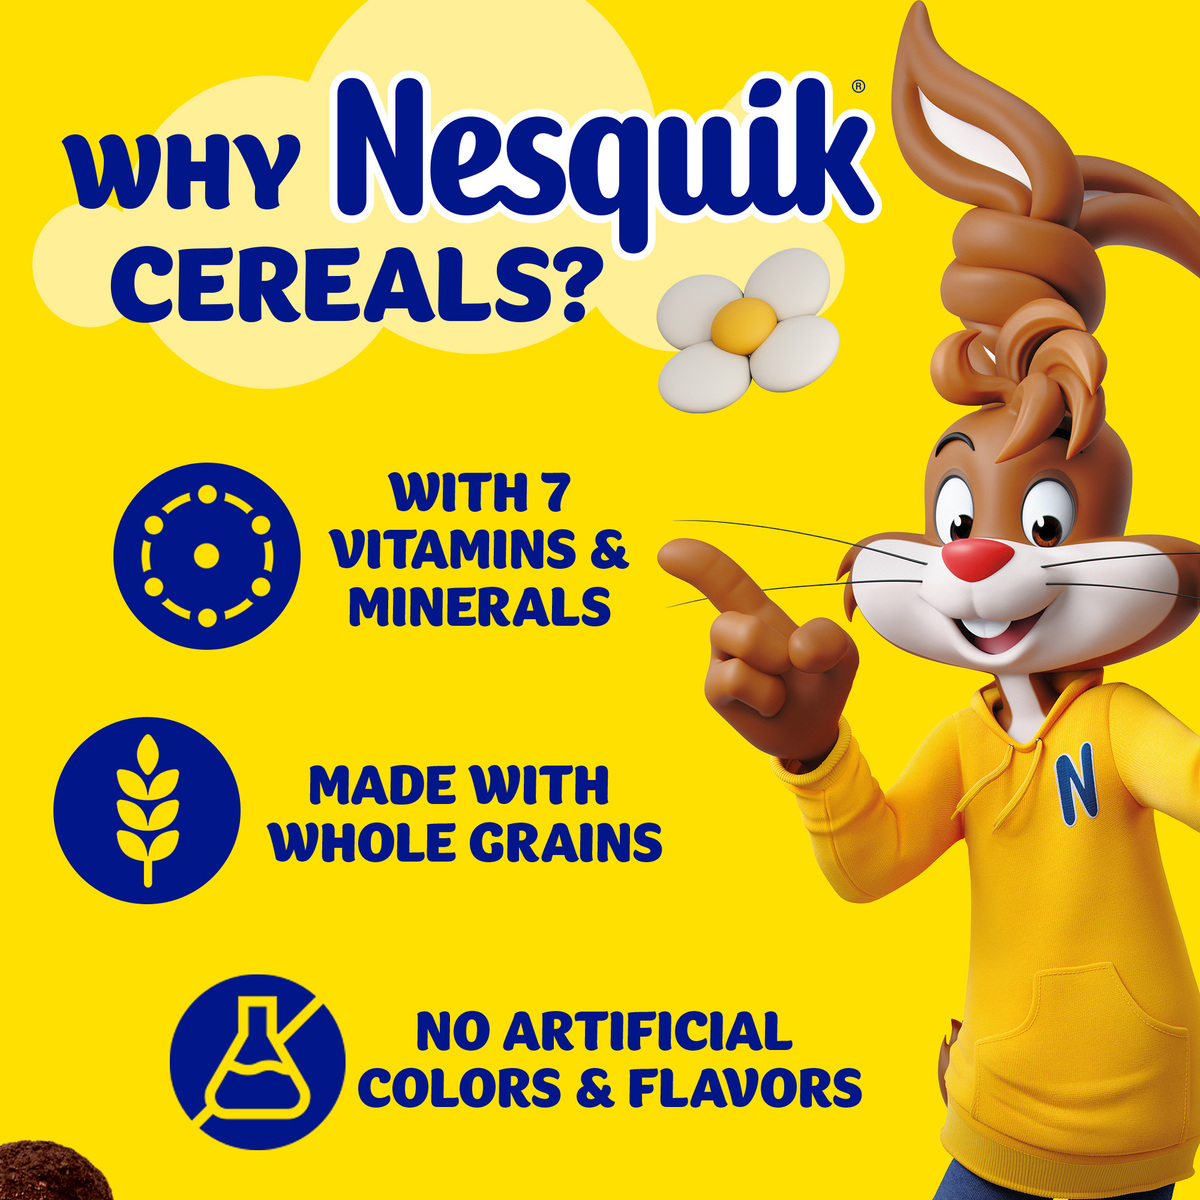 Nestle Nesquik Chocolate Flavoured Cereals Value Pack 500 g